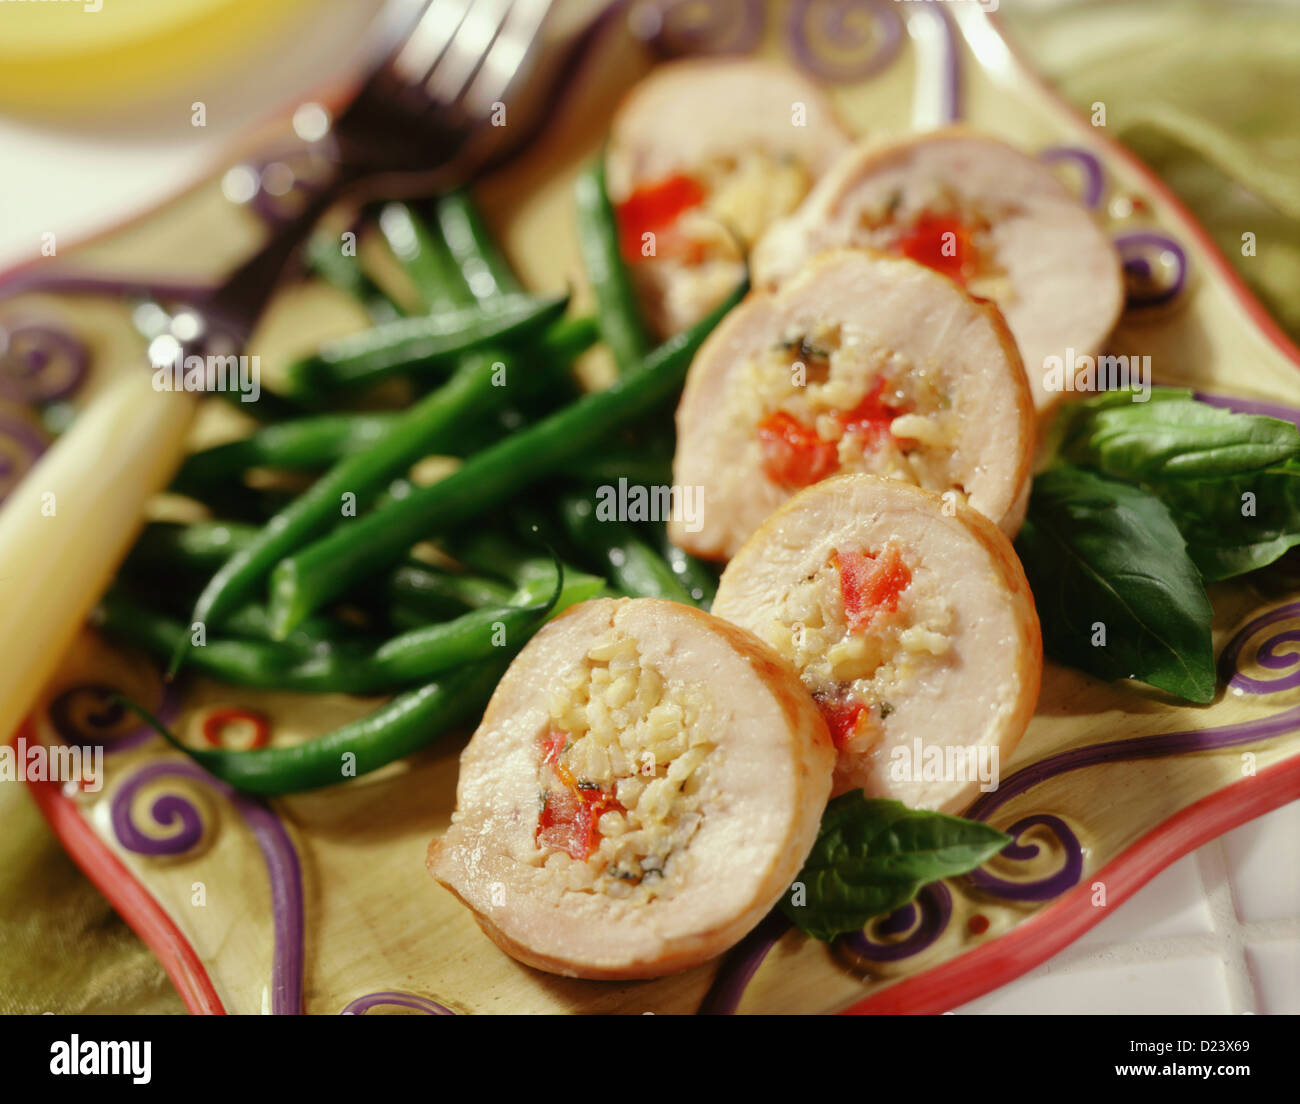 Slices of chicken stuffed with rice and served with green beans Stock Photo